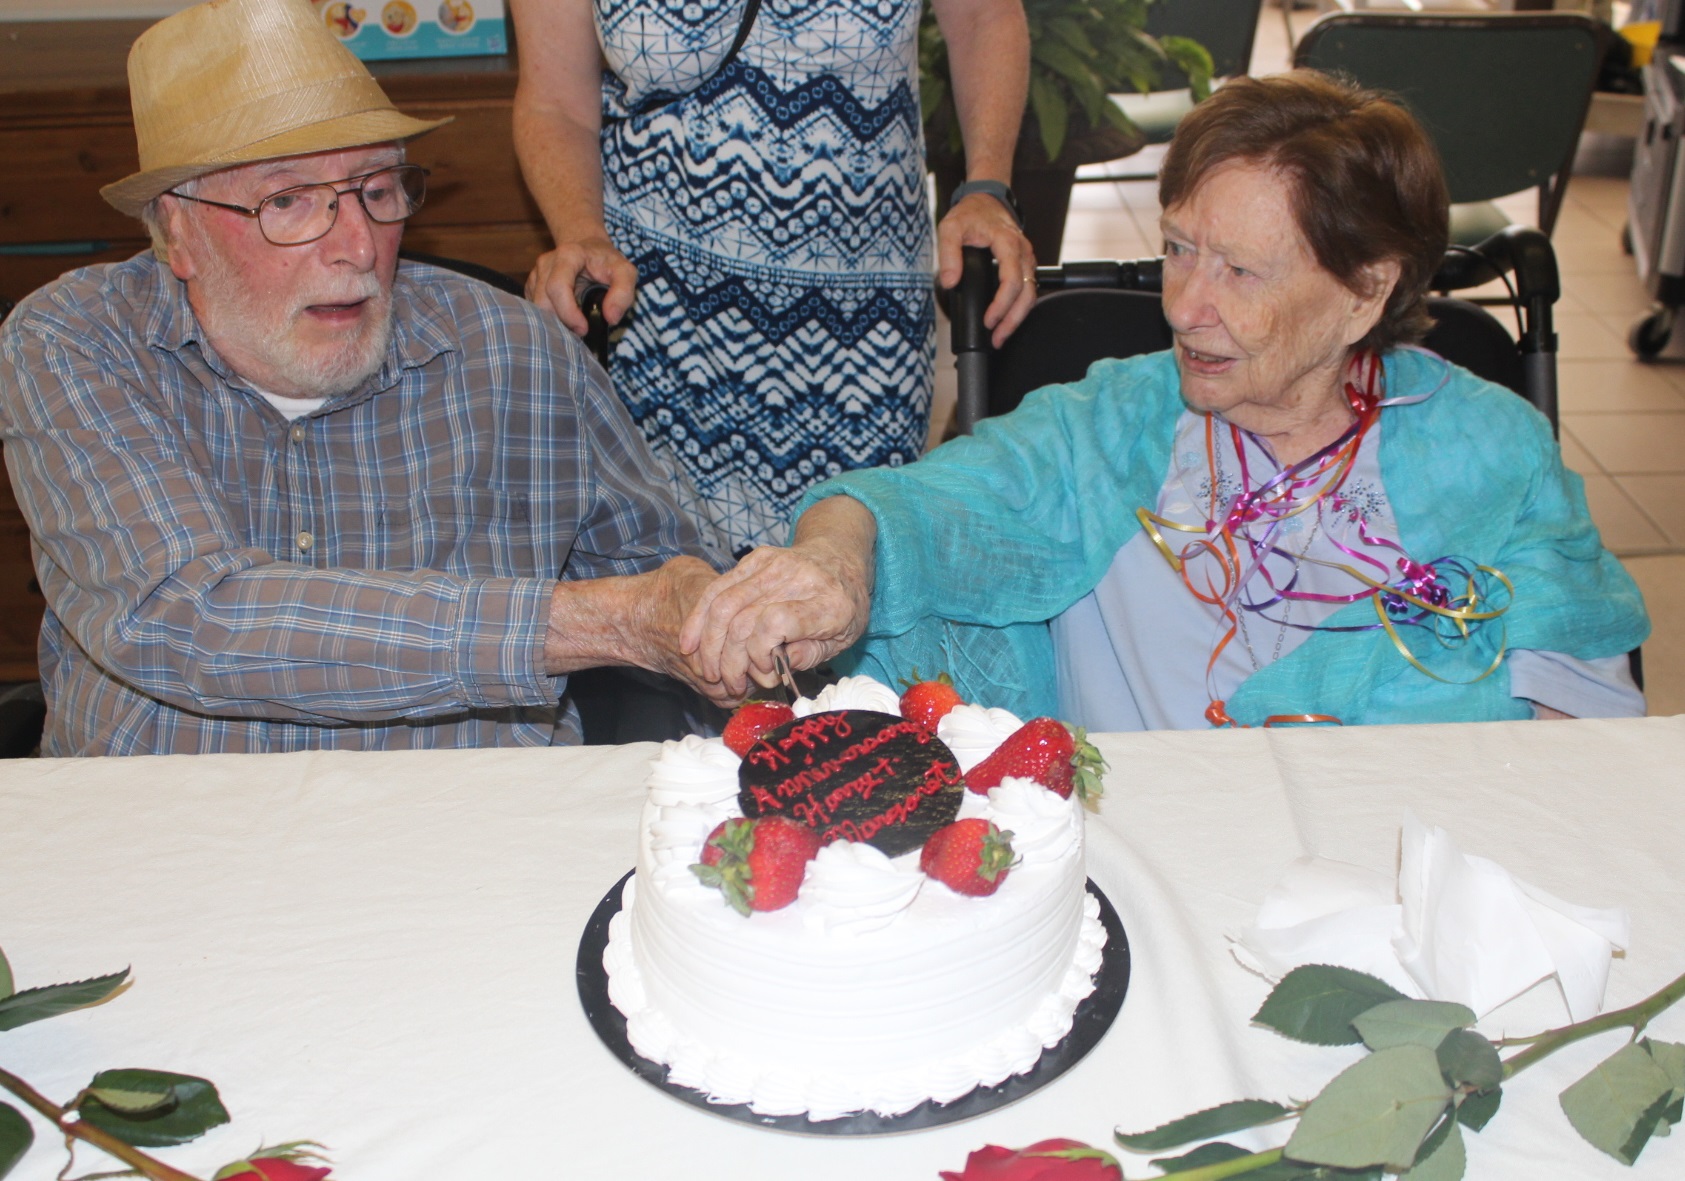 A renewal of vows for Harry and Margaret McMahon on Aug. 16 to mark their 65th Wedding Anniversary